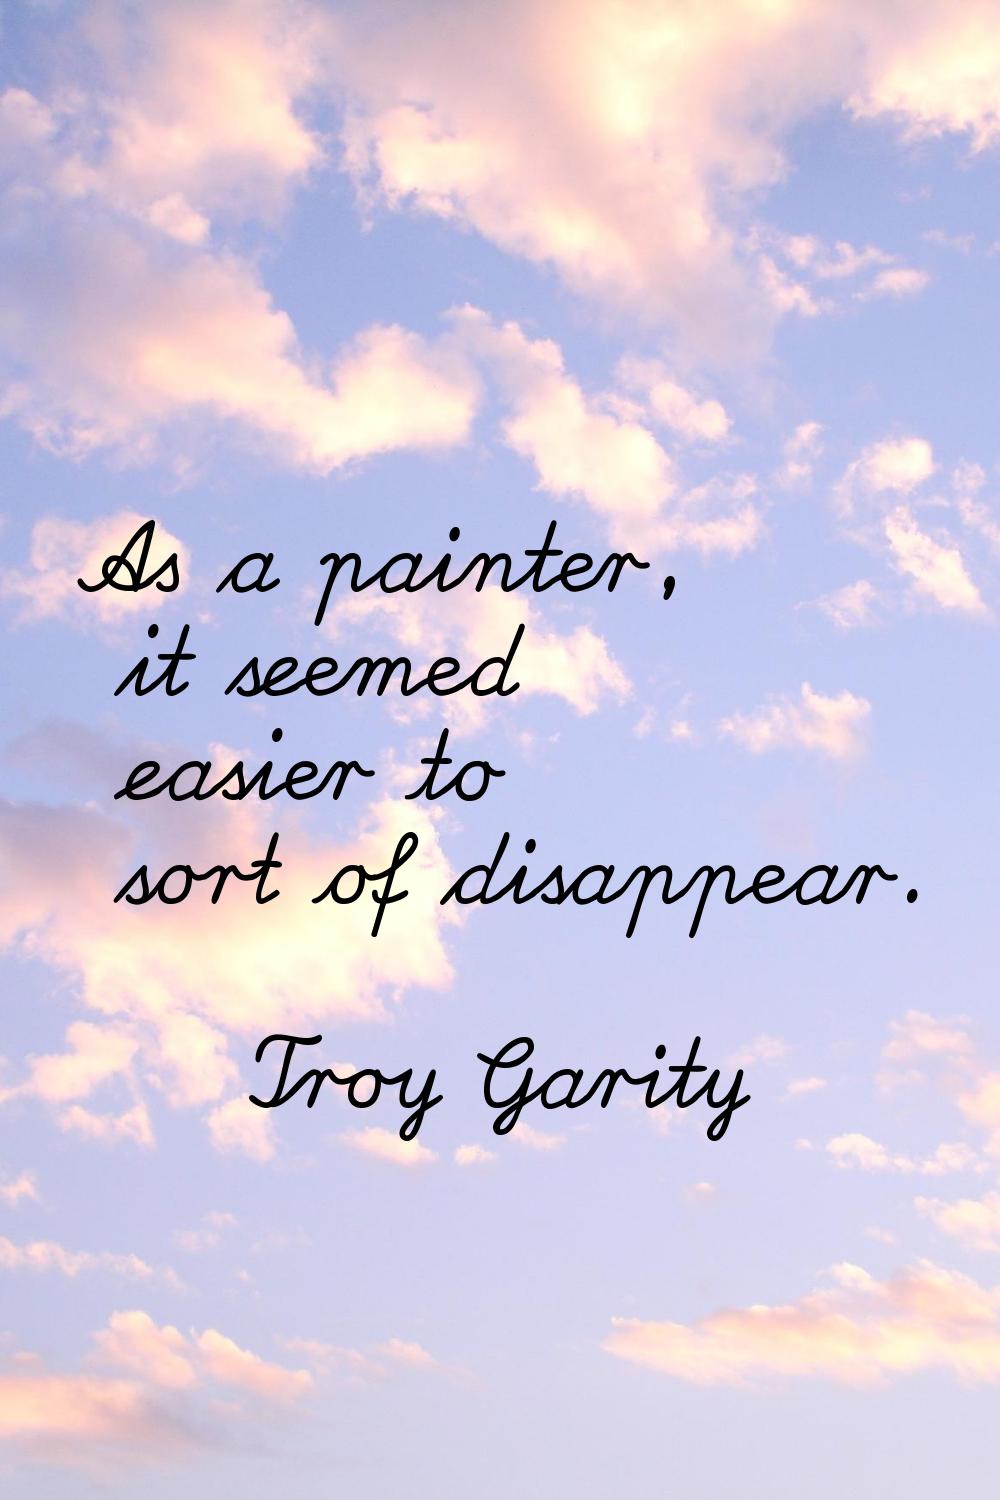 As a painter, it seemed easier to sort of disappear.